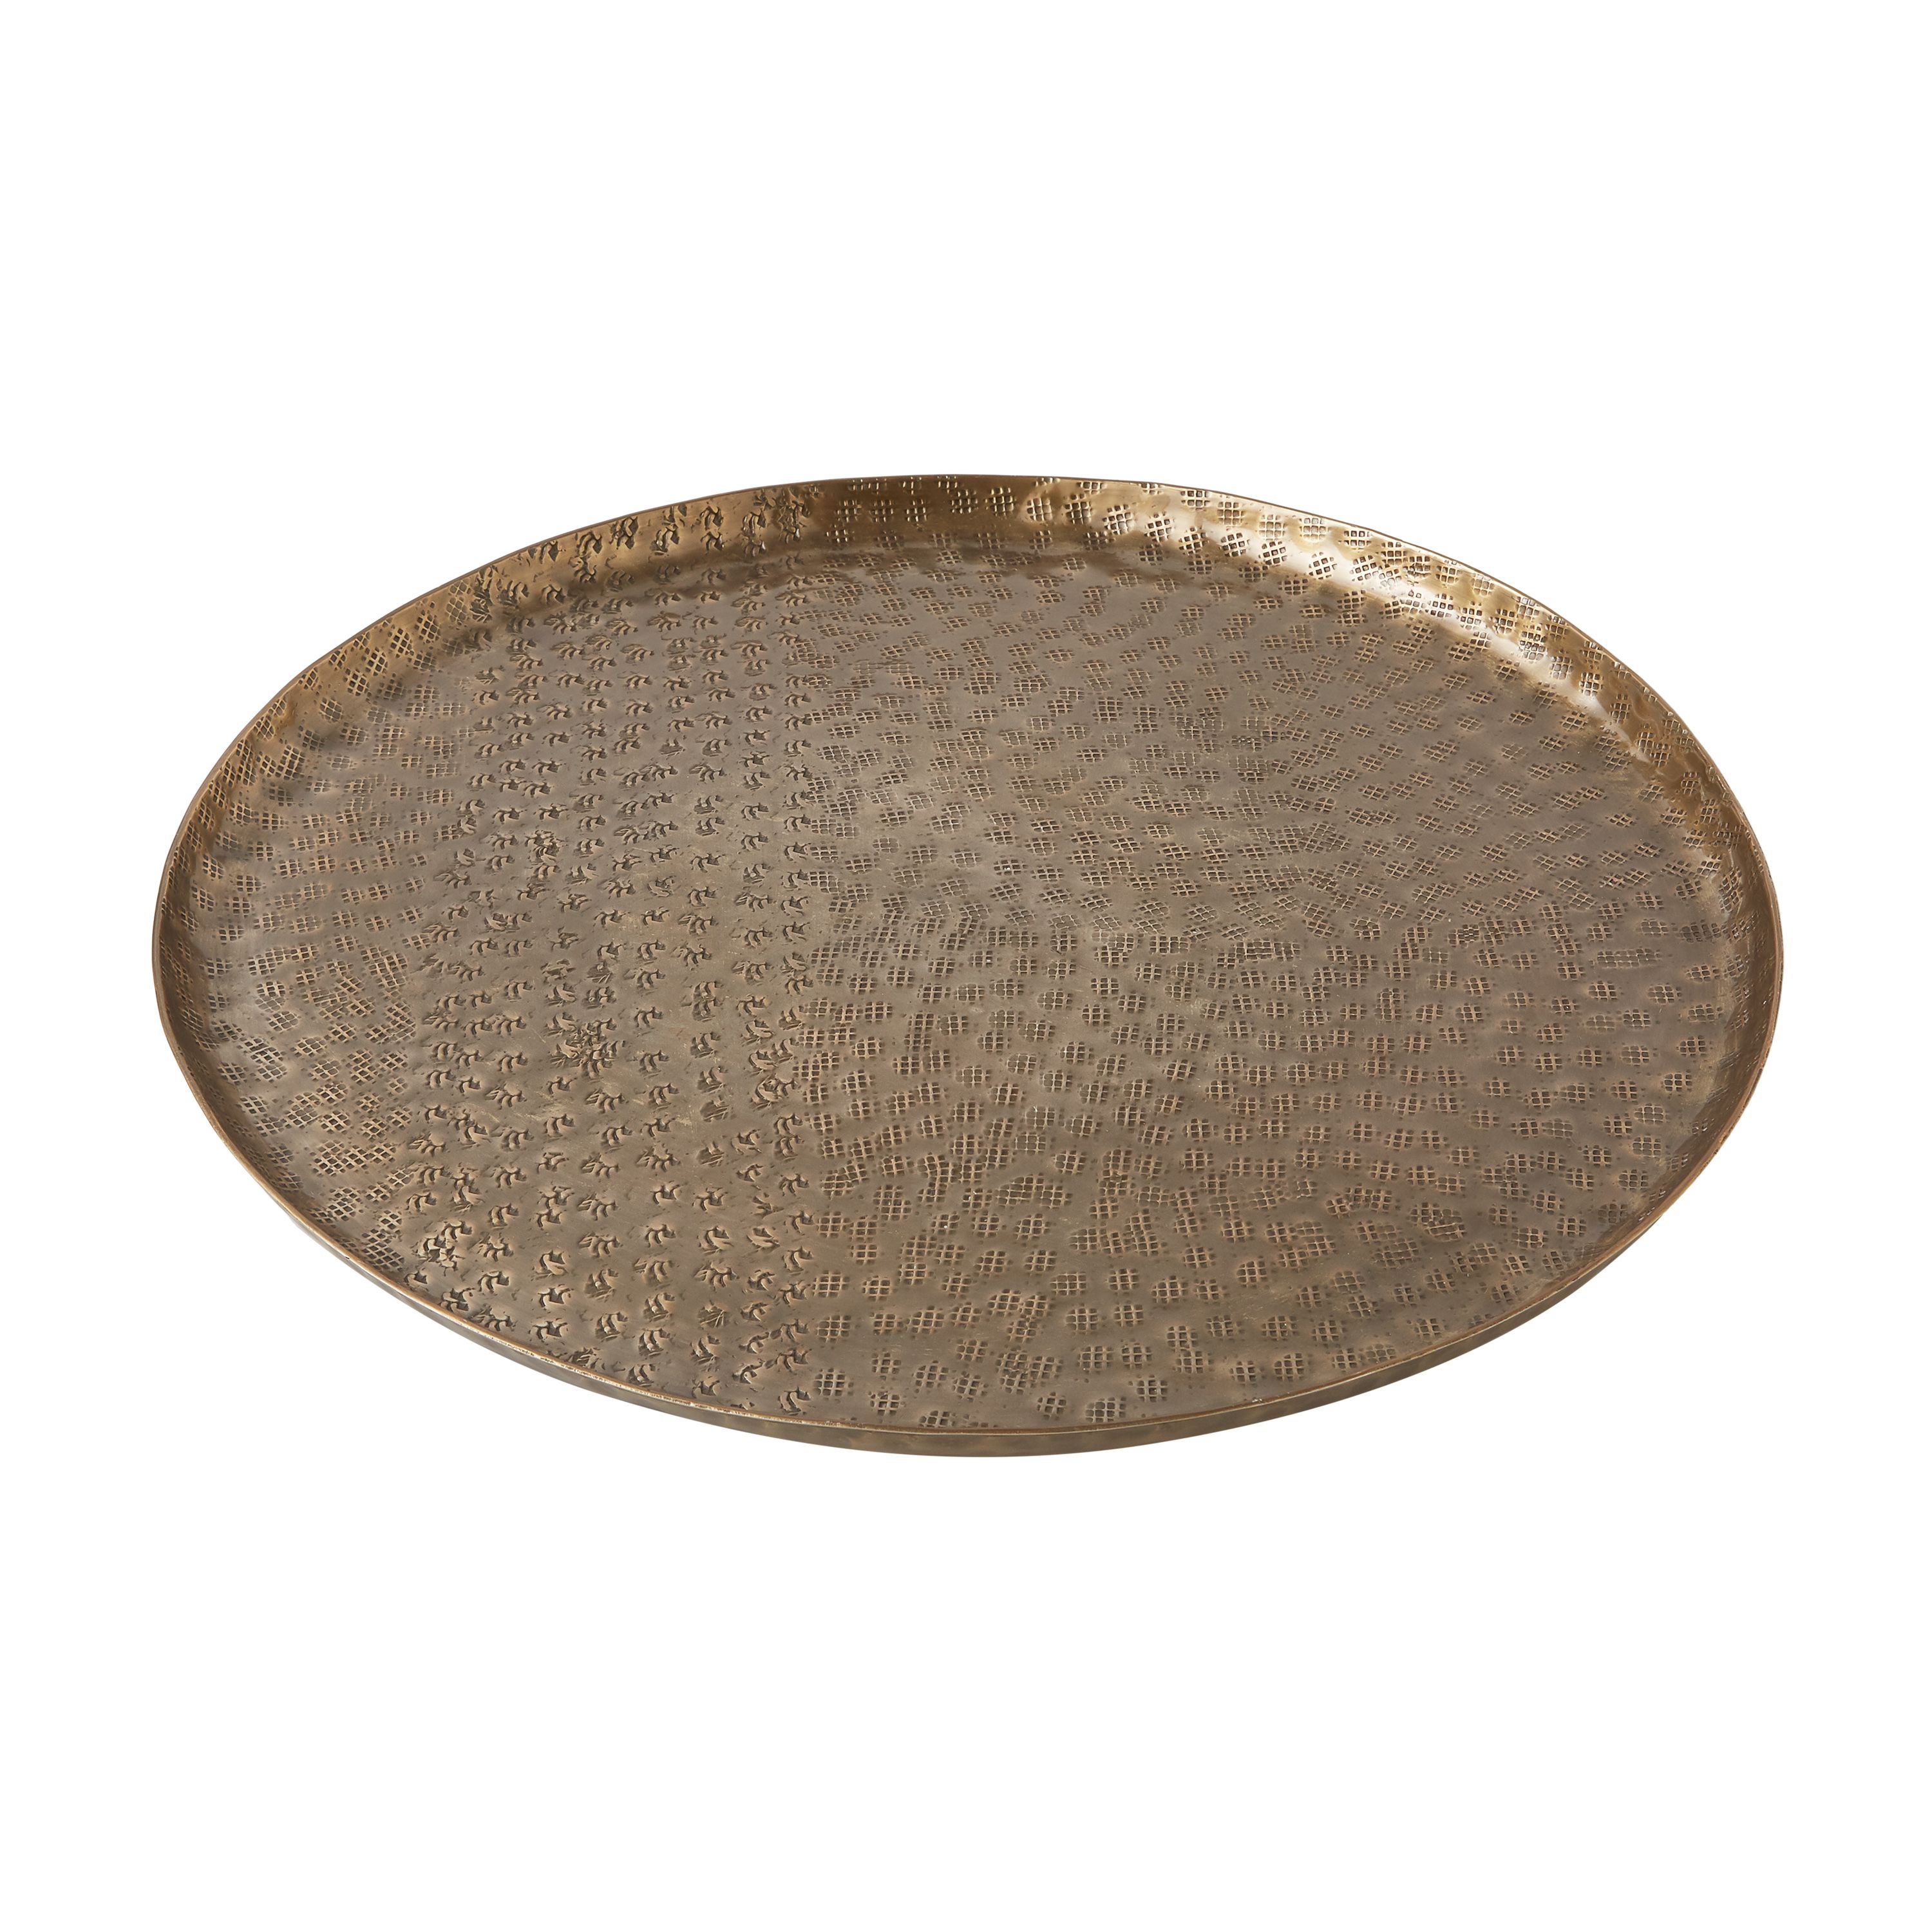 Better Homes & Gardens 16" Round Antique Brass Hammered Metal Tray by Dave & Jenny Marrs | Walmart (US)